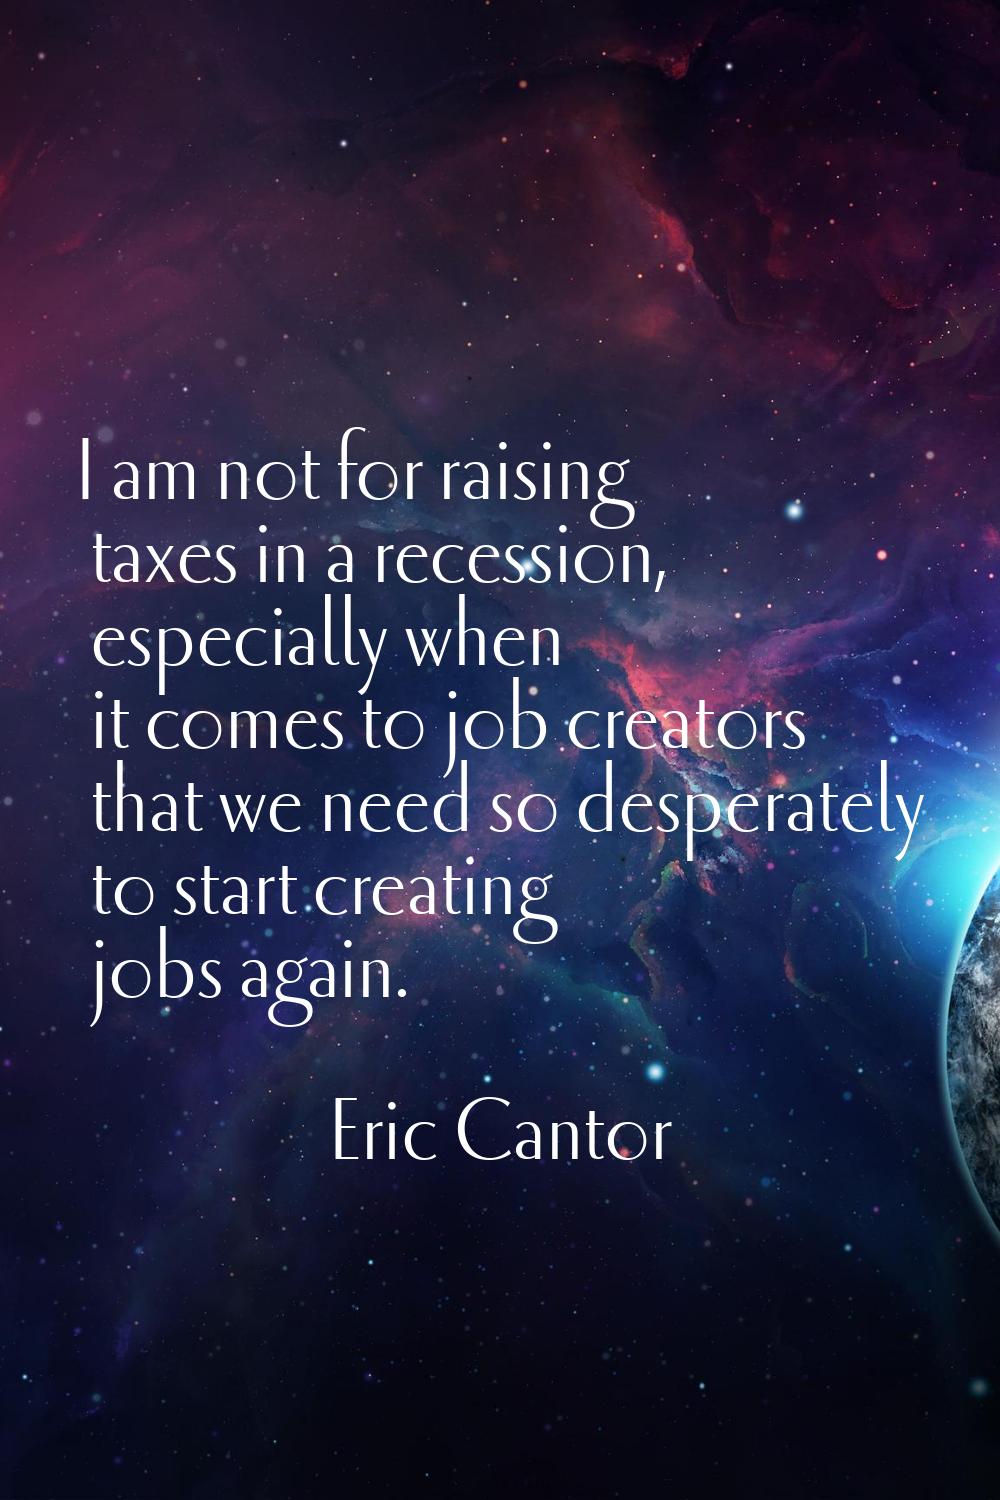 I am not for raising taxes in a recession, especially when it comes to job creators that we need so